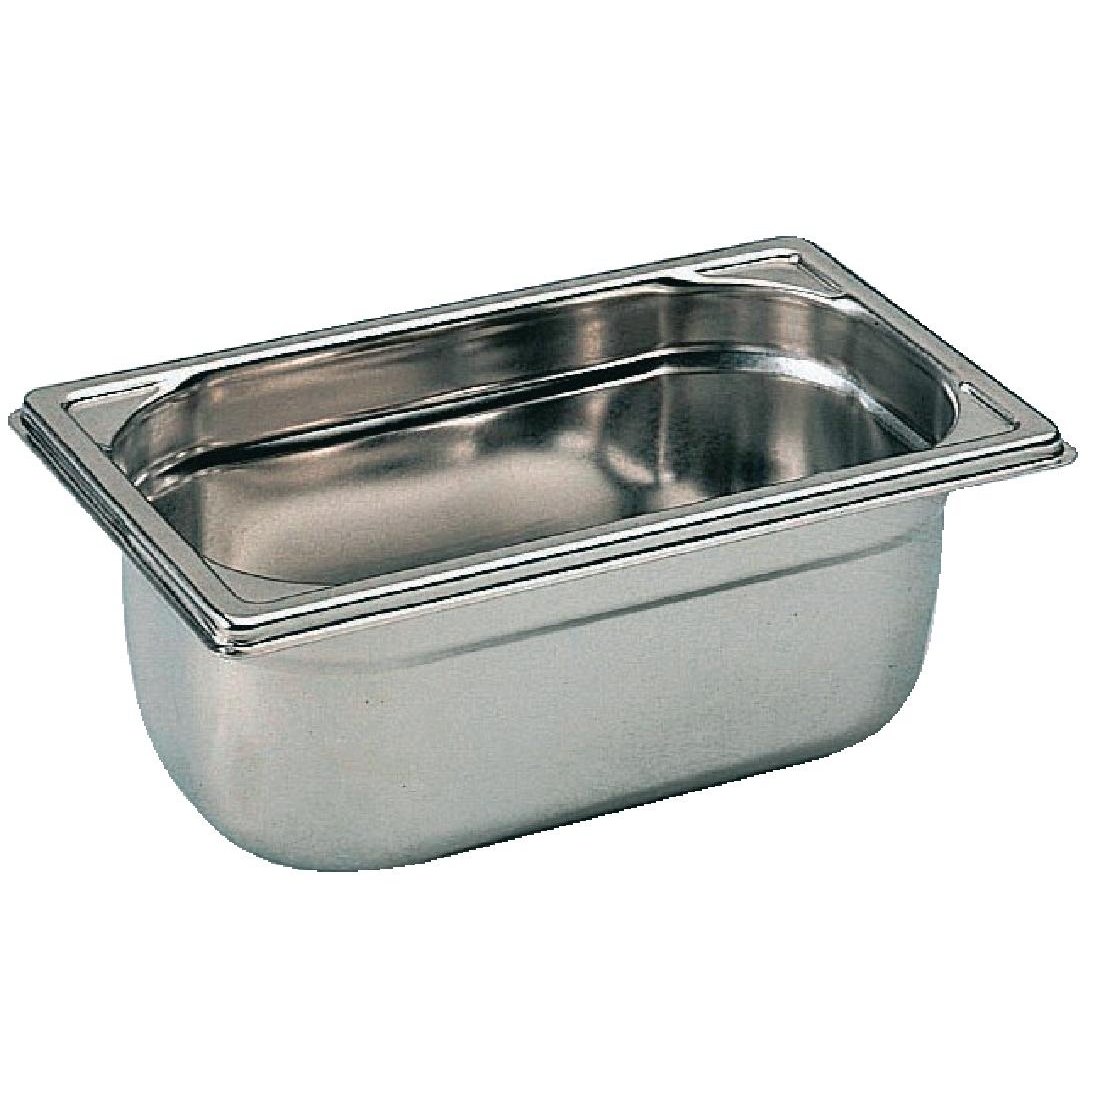 Bourgeat Stainless Steel 1/4 Gastronorm Pan 65mm